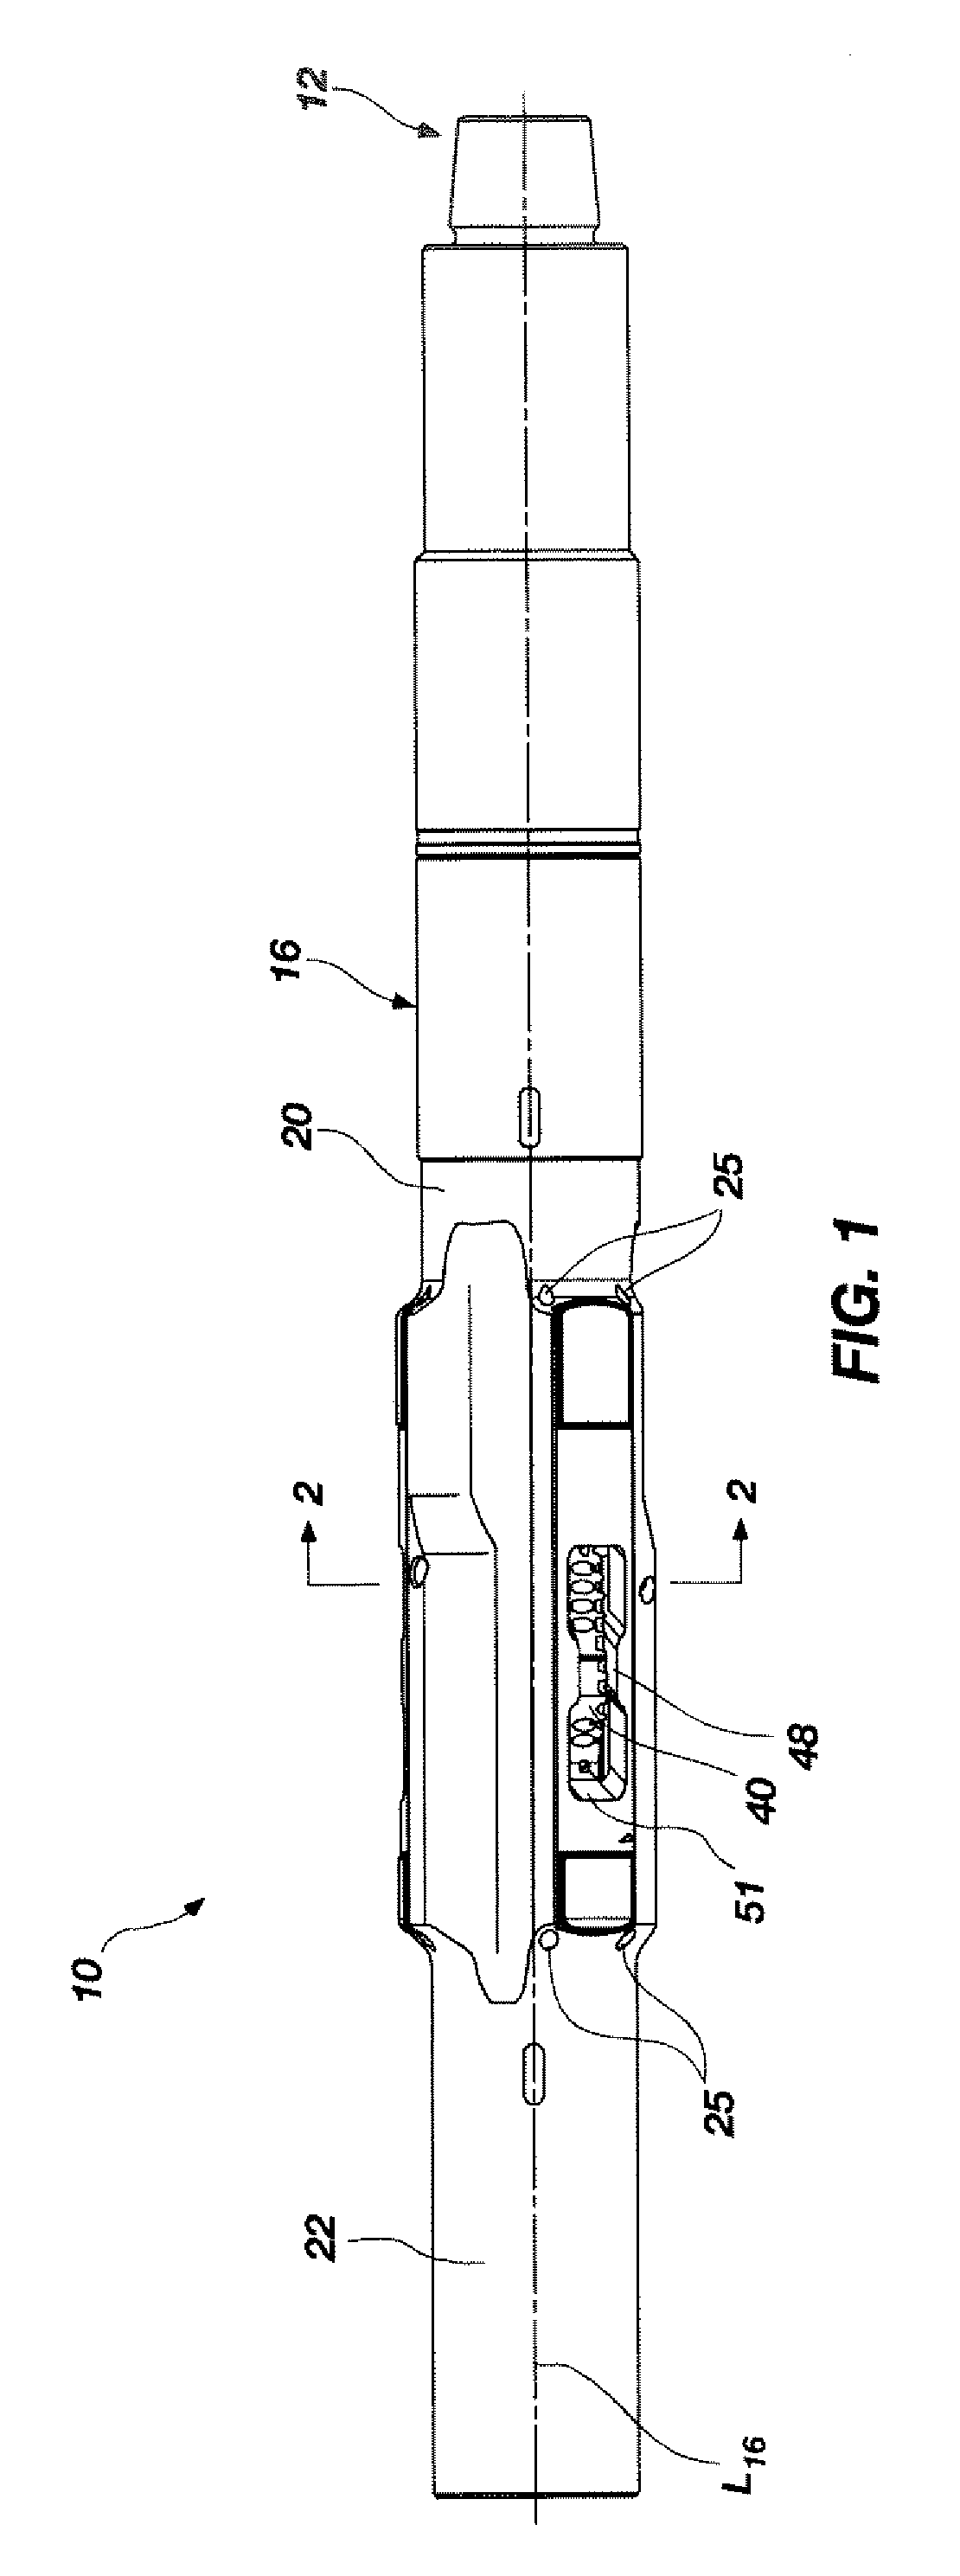 Expandable reamers for earth-boring applications and methods of using the same